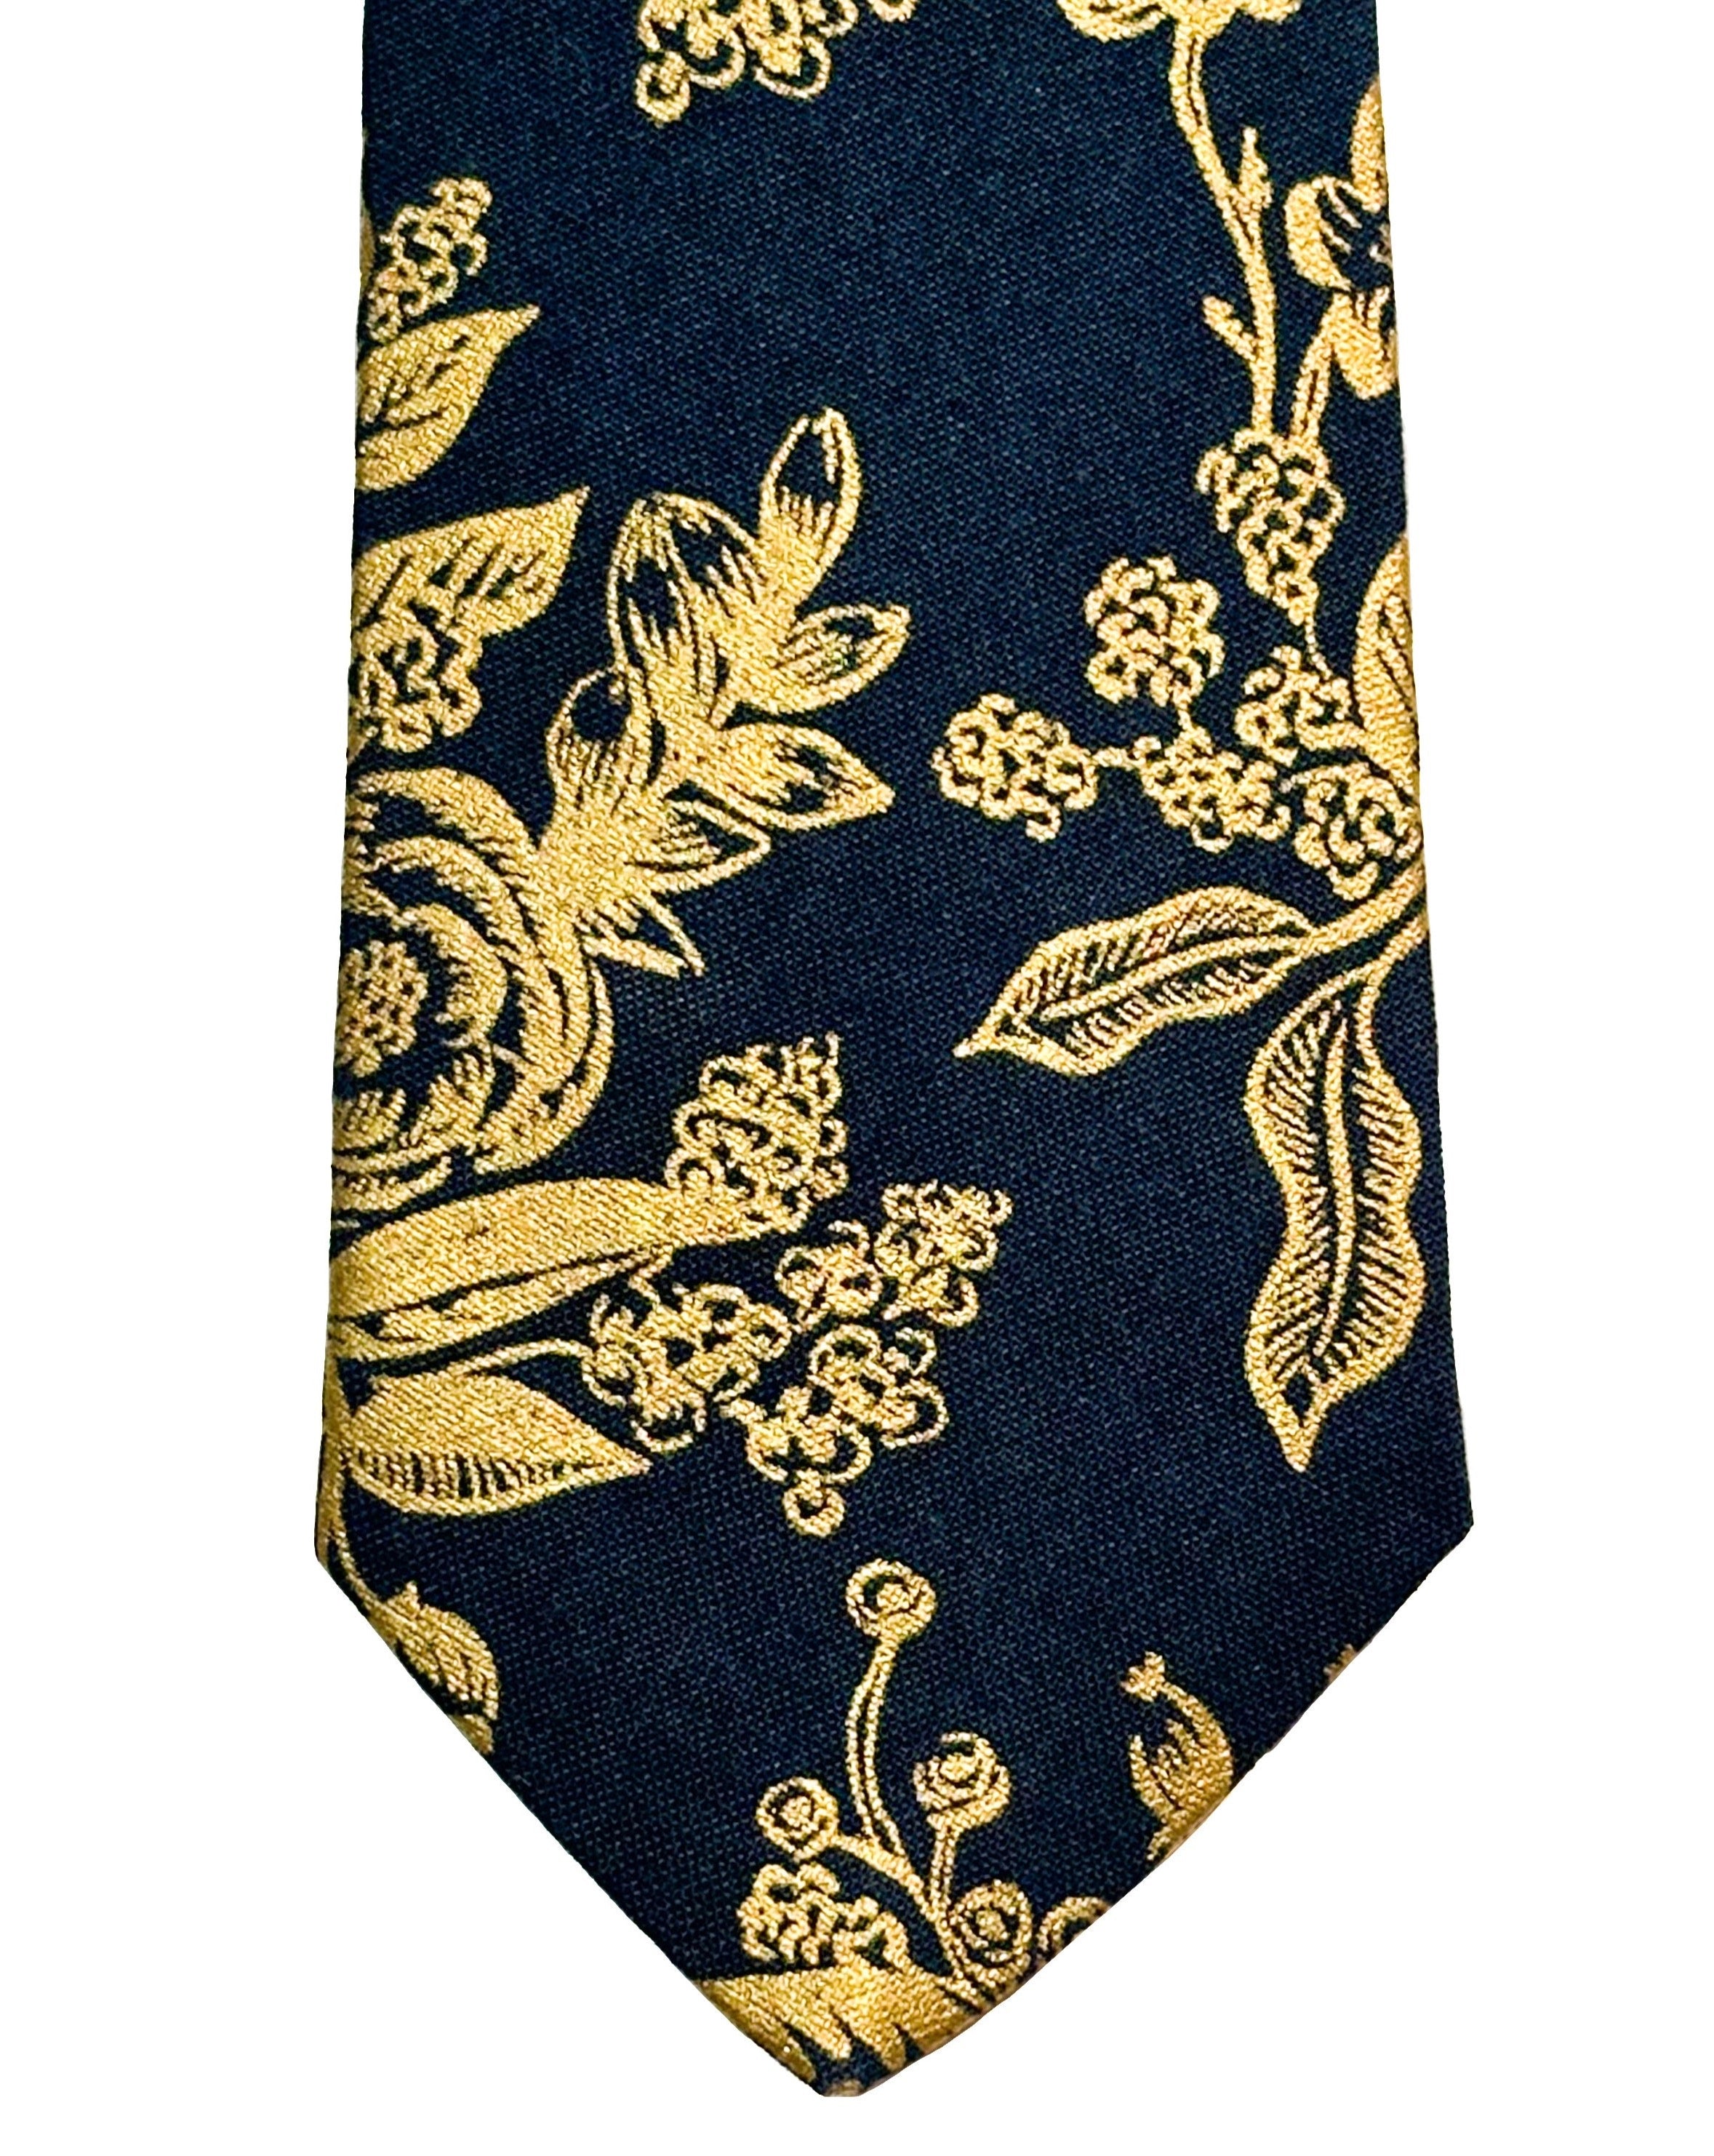 The Tie | Gold Floral